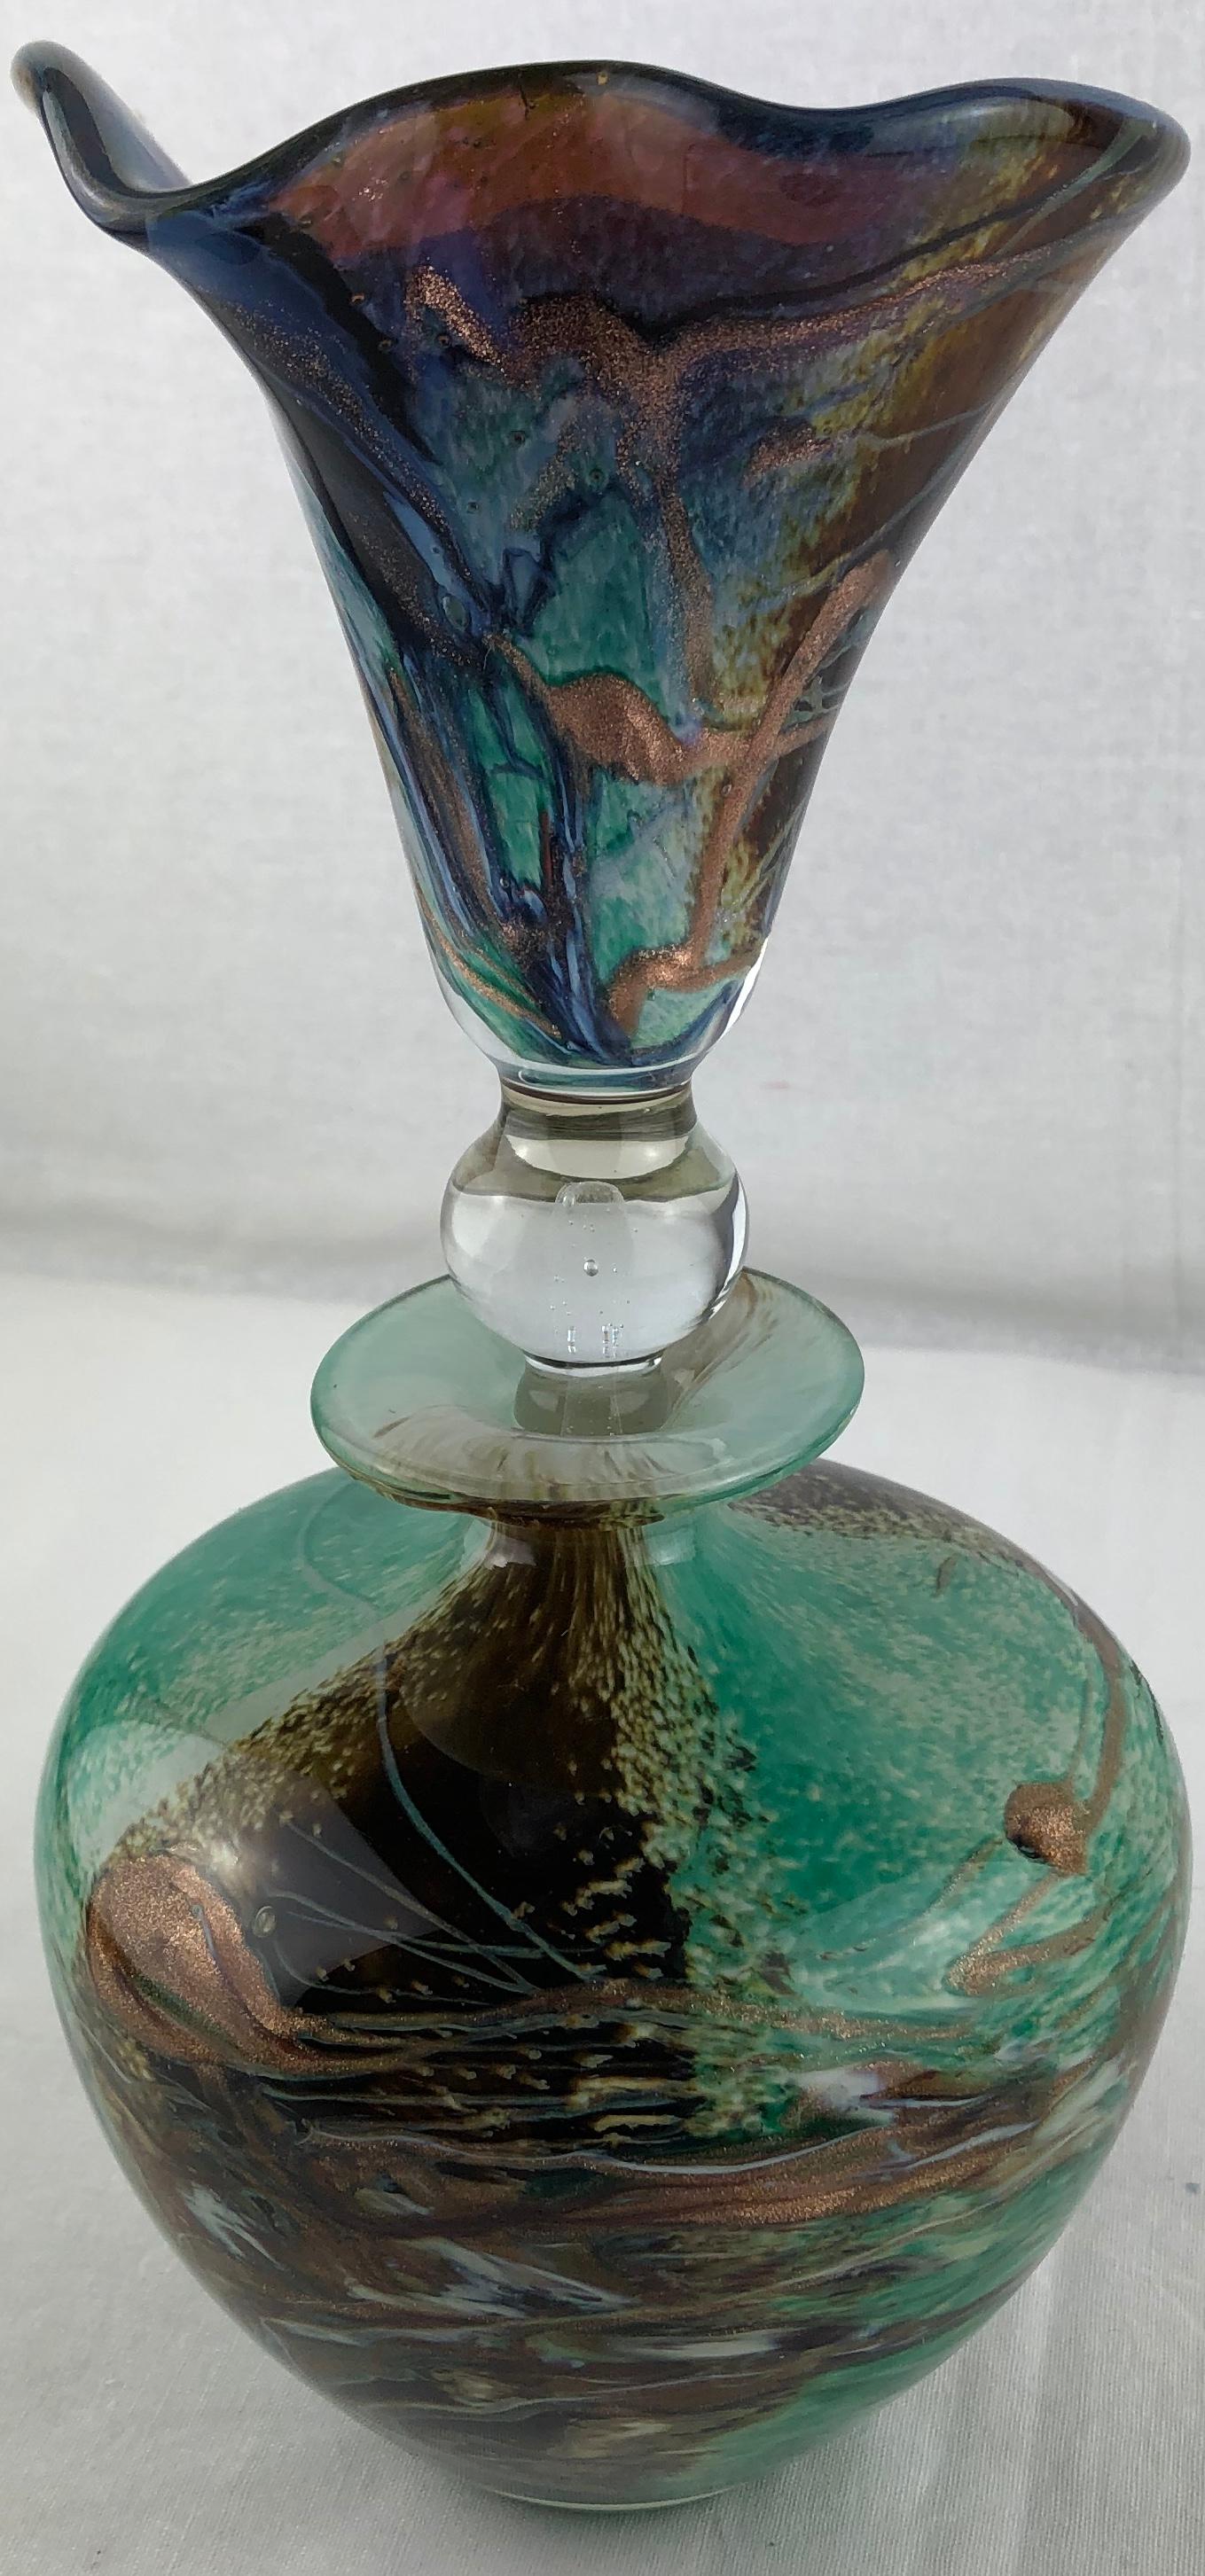 A rare and unique handcrafted art glass perfume bottle by Michele Luzoro, known as the 